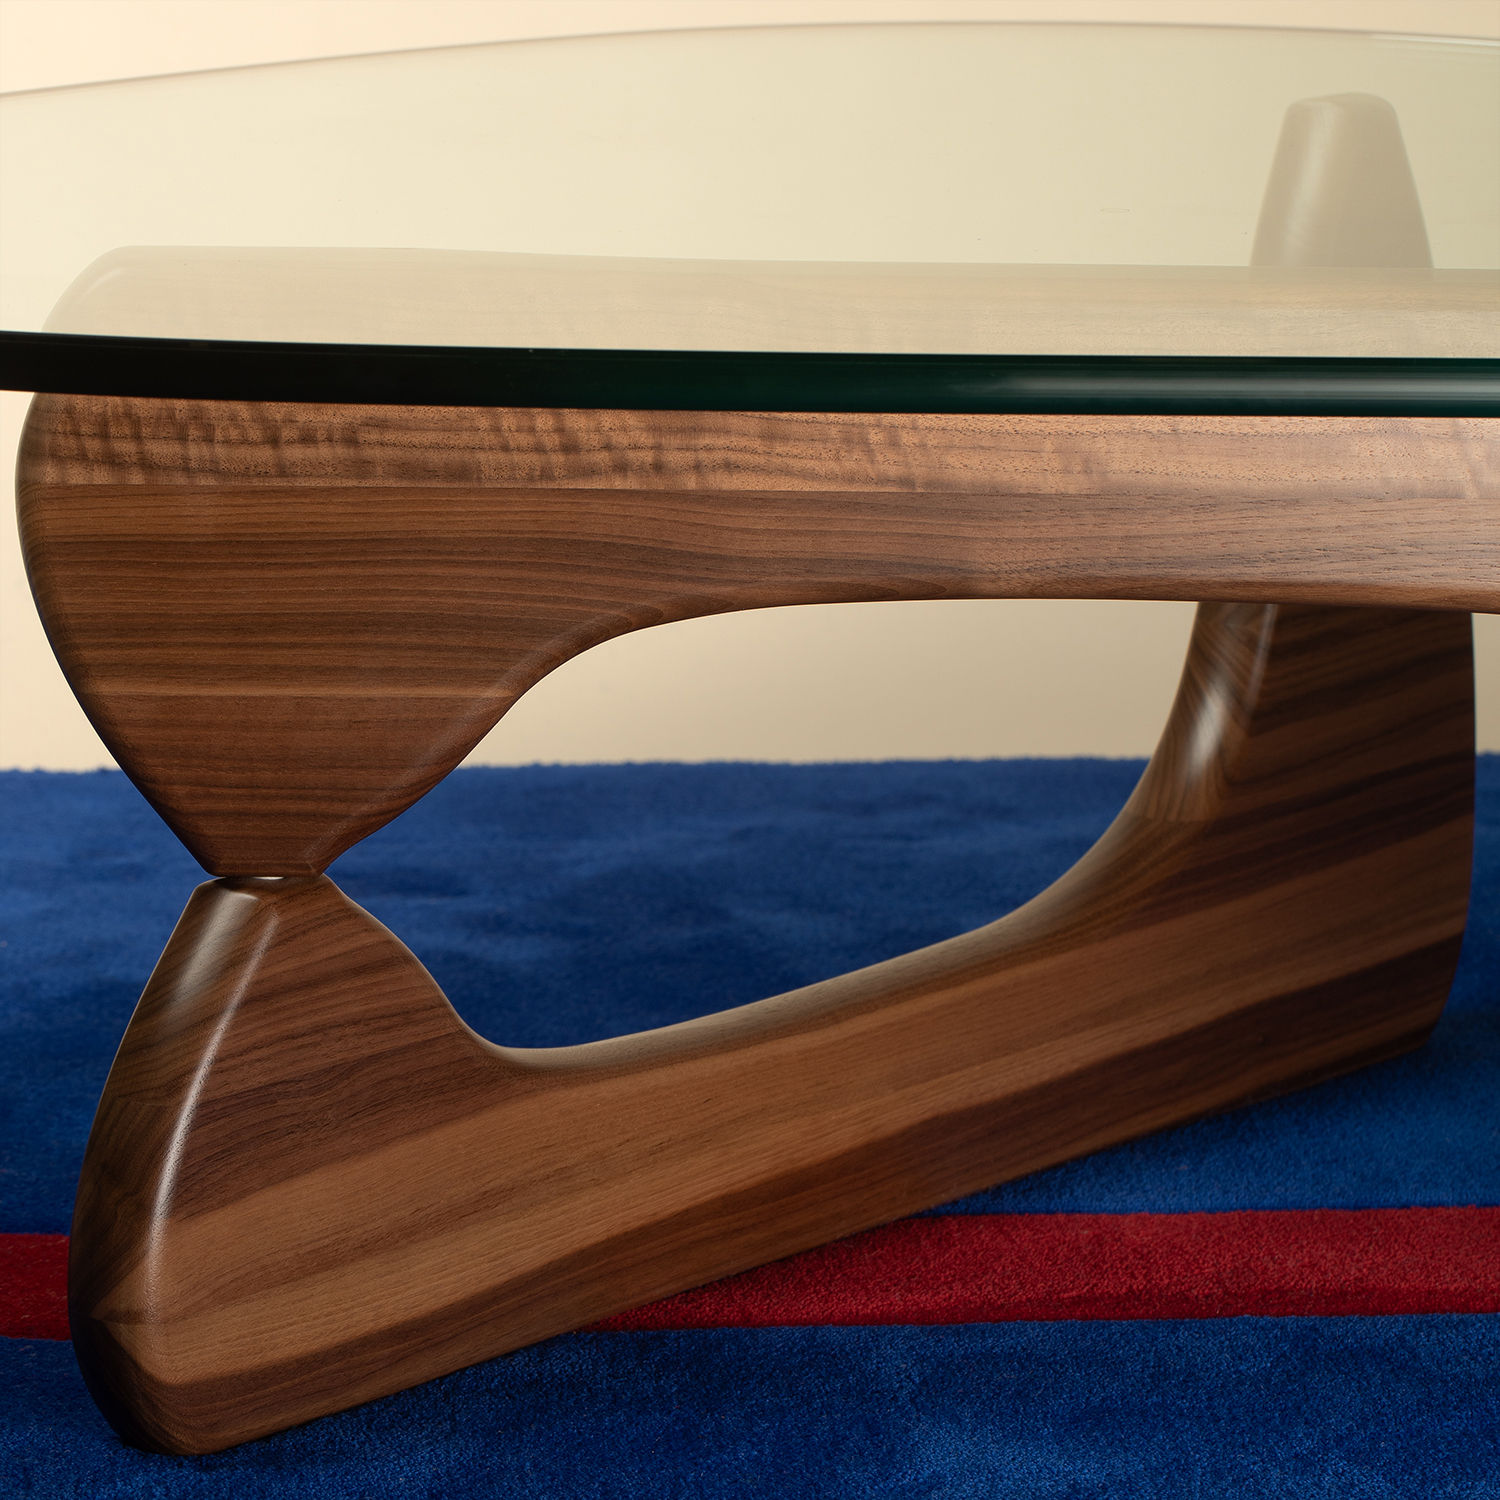 https://media.madeindesign.com/nuxeo/products/b/1/table-basse-noguchi-coffee-table-noyer_madeindesign_415734_original.jpg